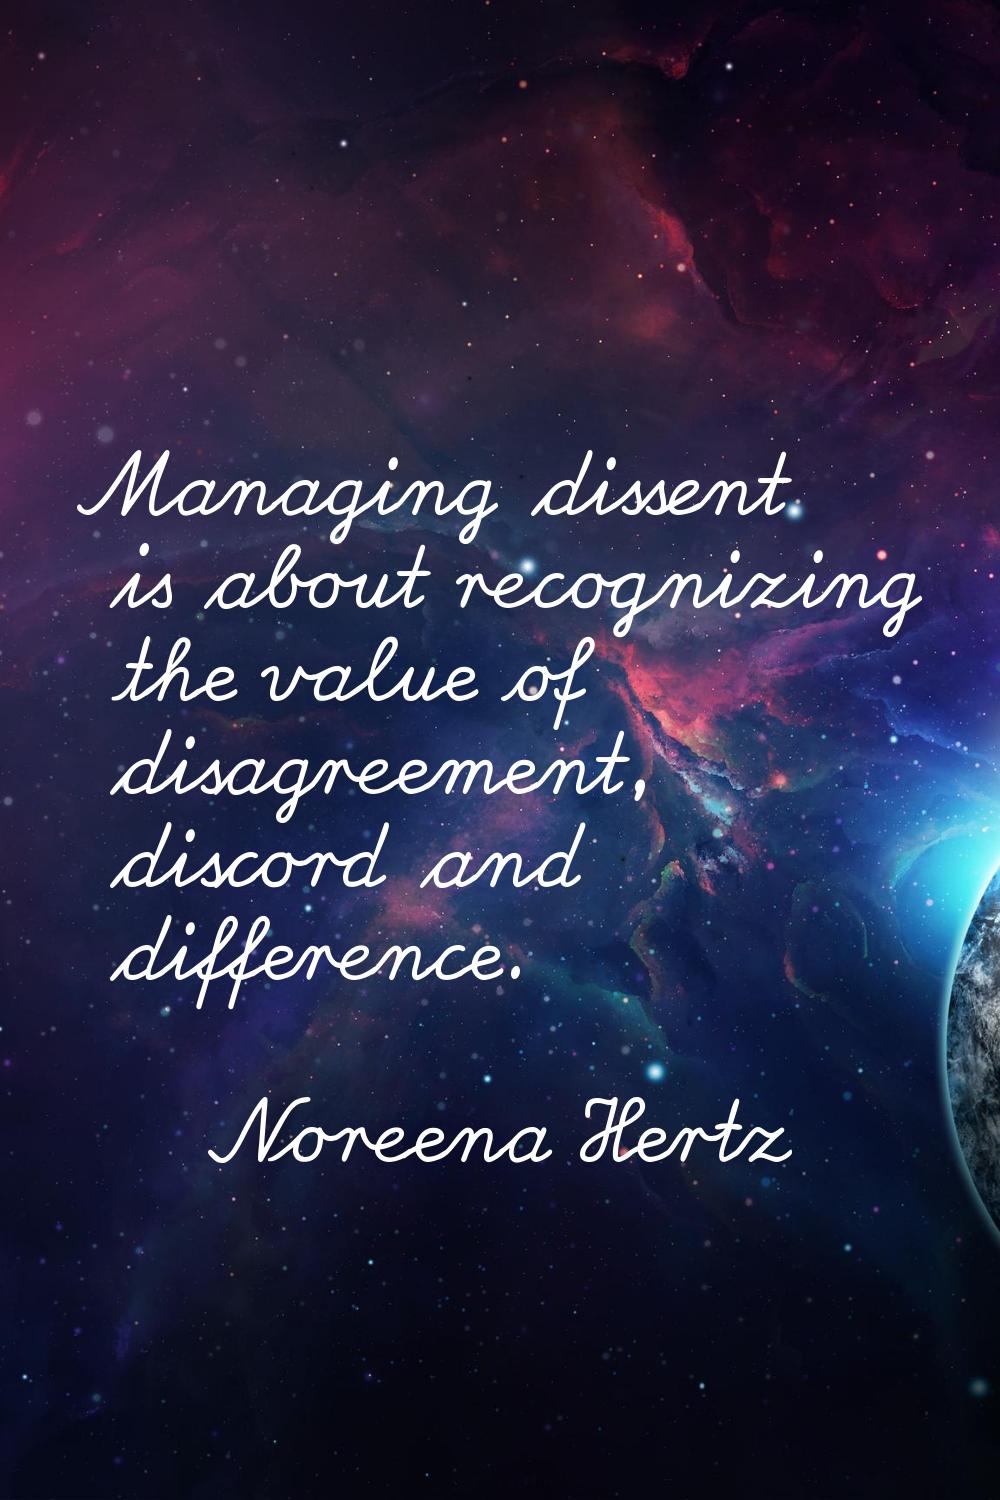 Managing dissent is about recognizing the value of disagreement, discord and difference.